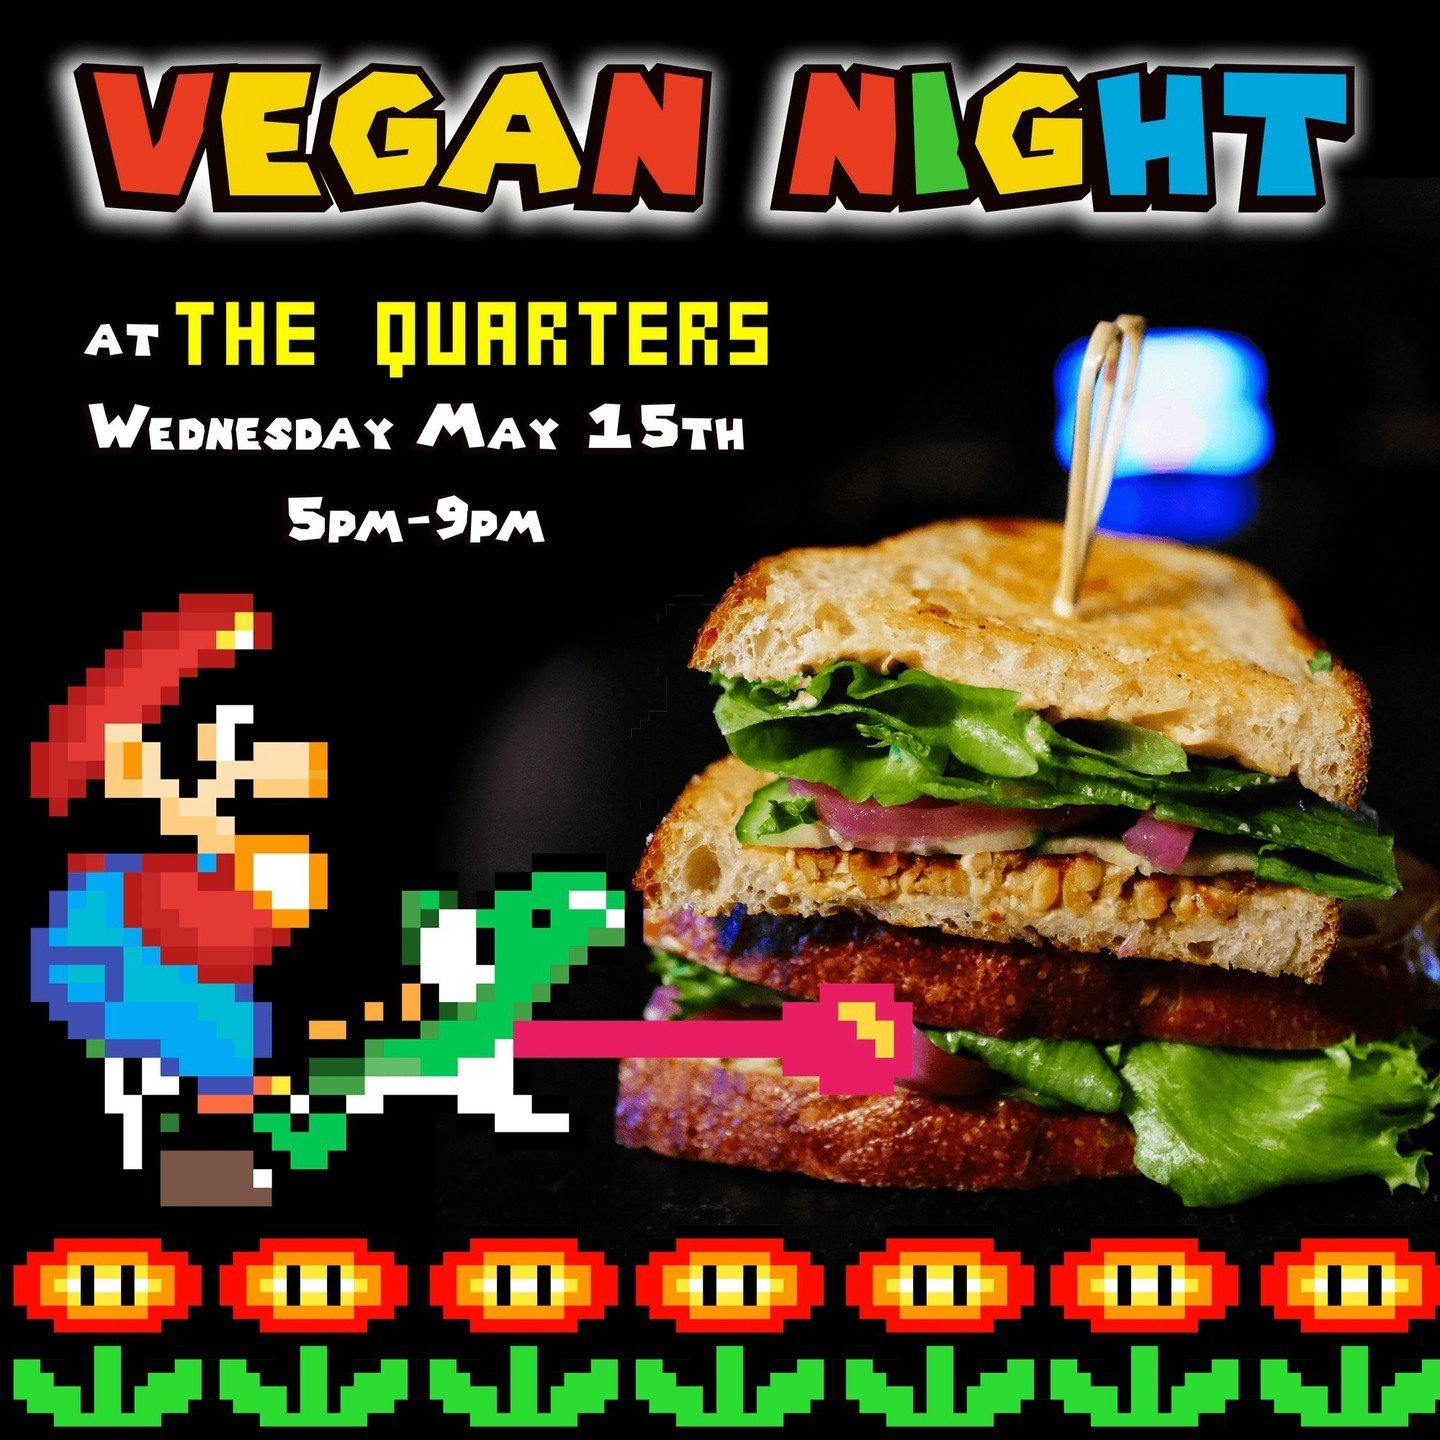 Vegan Night is returning to The Quarters by popular demand on Wednesday May 15th!

Our everyday menu features tons of vegan options like our Tempest sandwich, and at Vegan Night you can expect even more choices to enjoy in between rounds of Tetris or